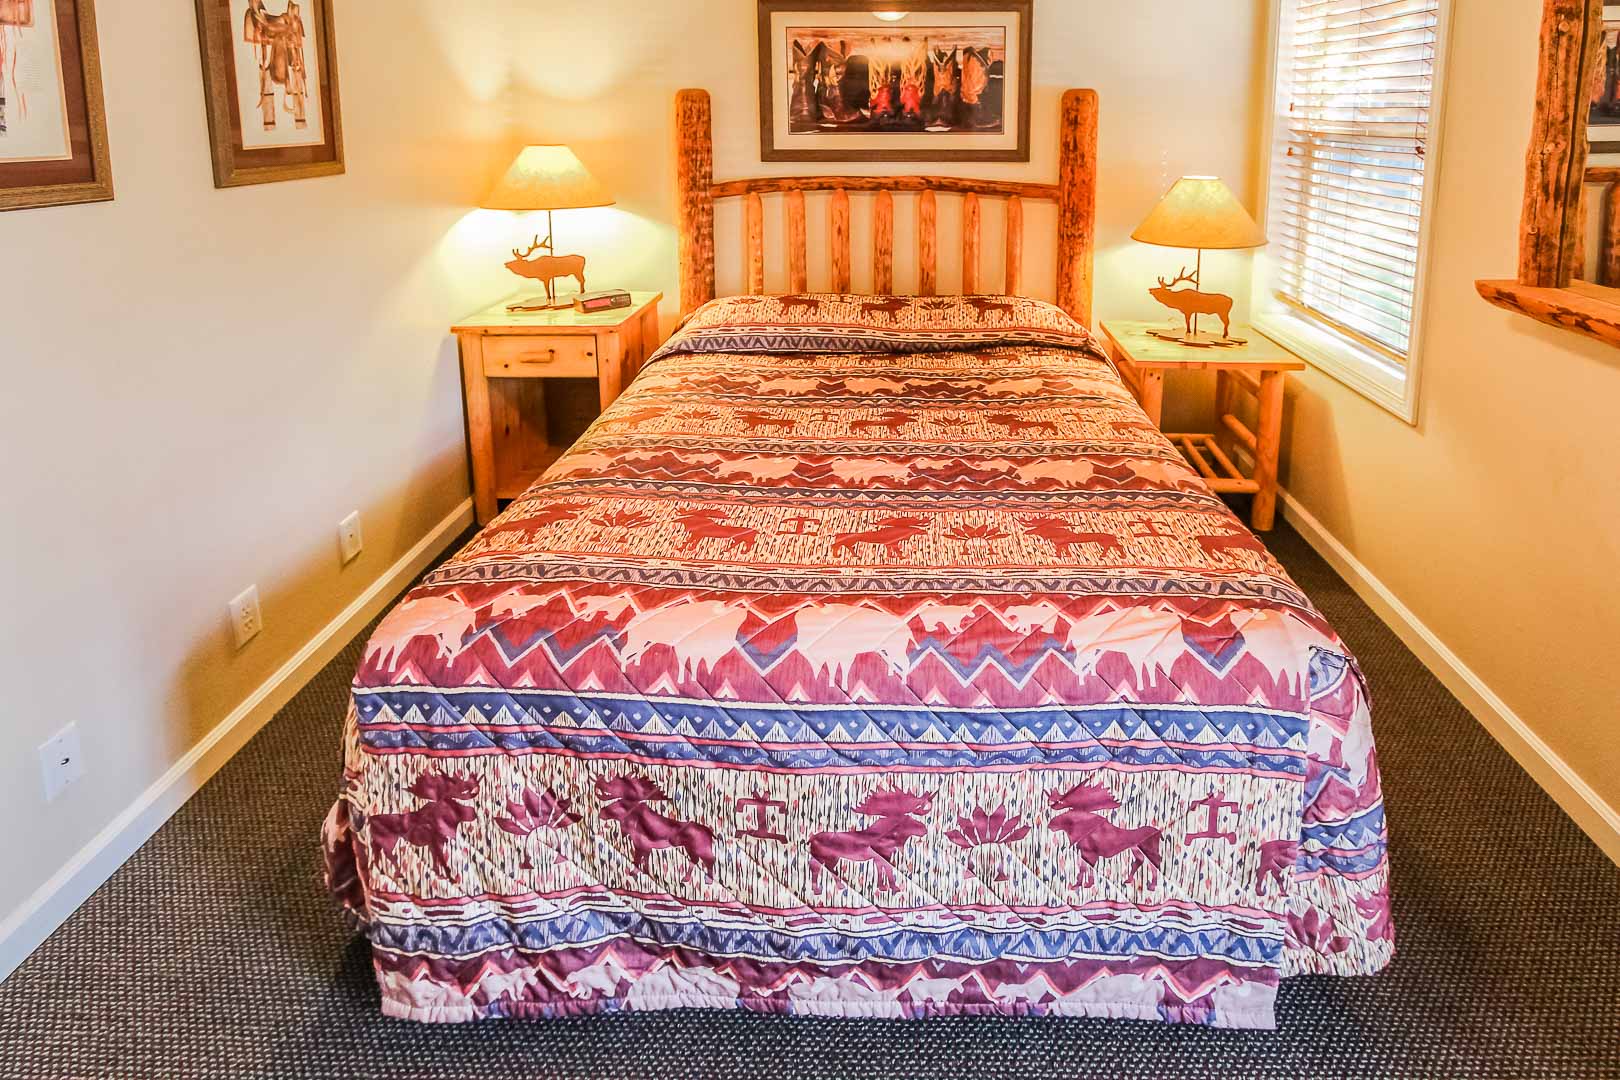 A cozy bedroom at VRI's Jackson Pines in Wyoming.